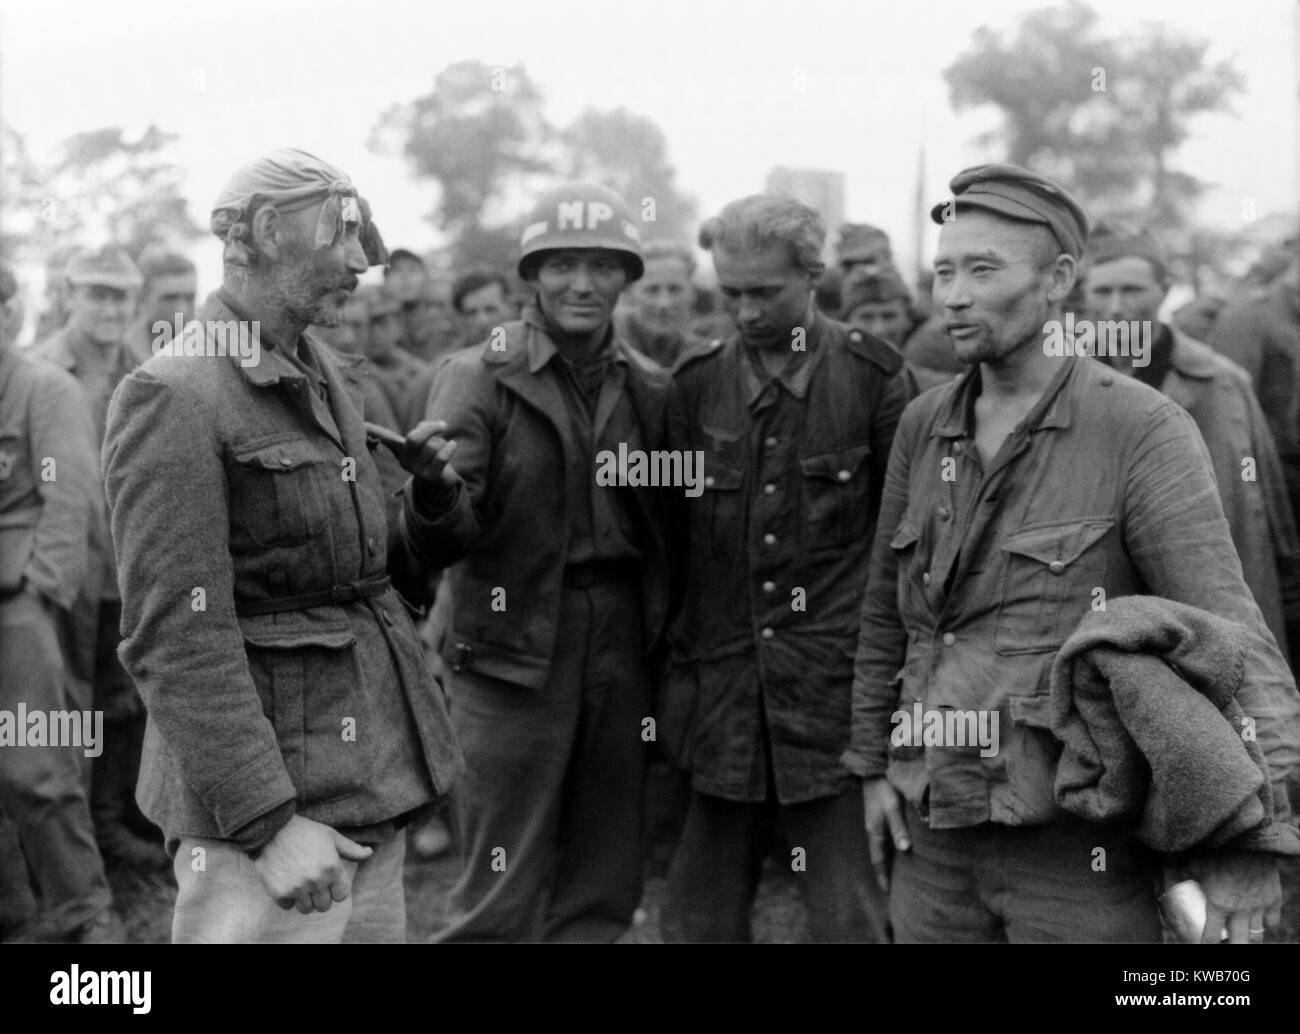 Two older POWs fighting in the German army were White Russian Mongols. At the end of the war they would be forcibly repatriated to an unpromising future in the Soviet Union (Russia). August, 11, 1944, near Nonat le Pin, France. World War 2. (BSLOC 2014 8 91) Stock Photo